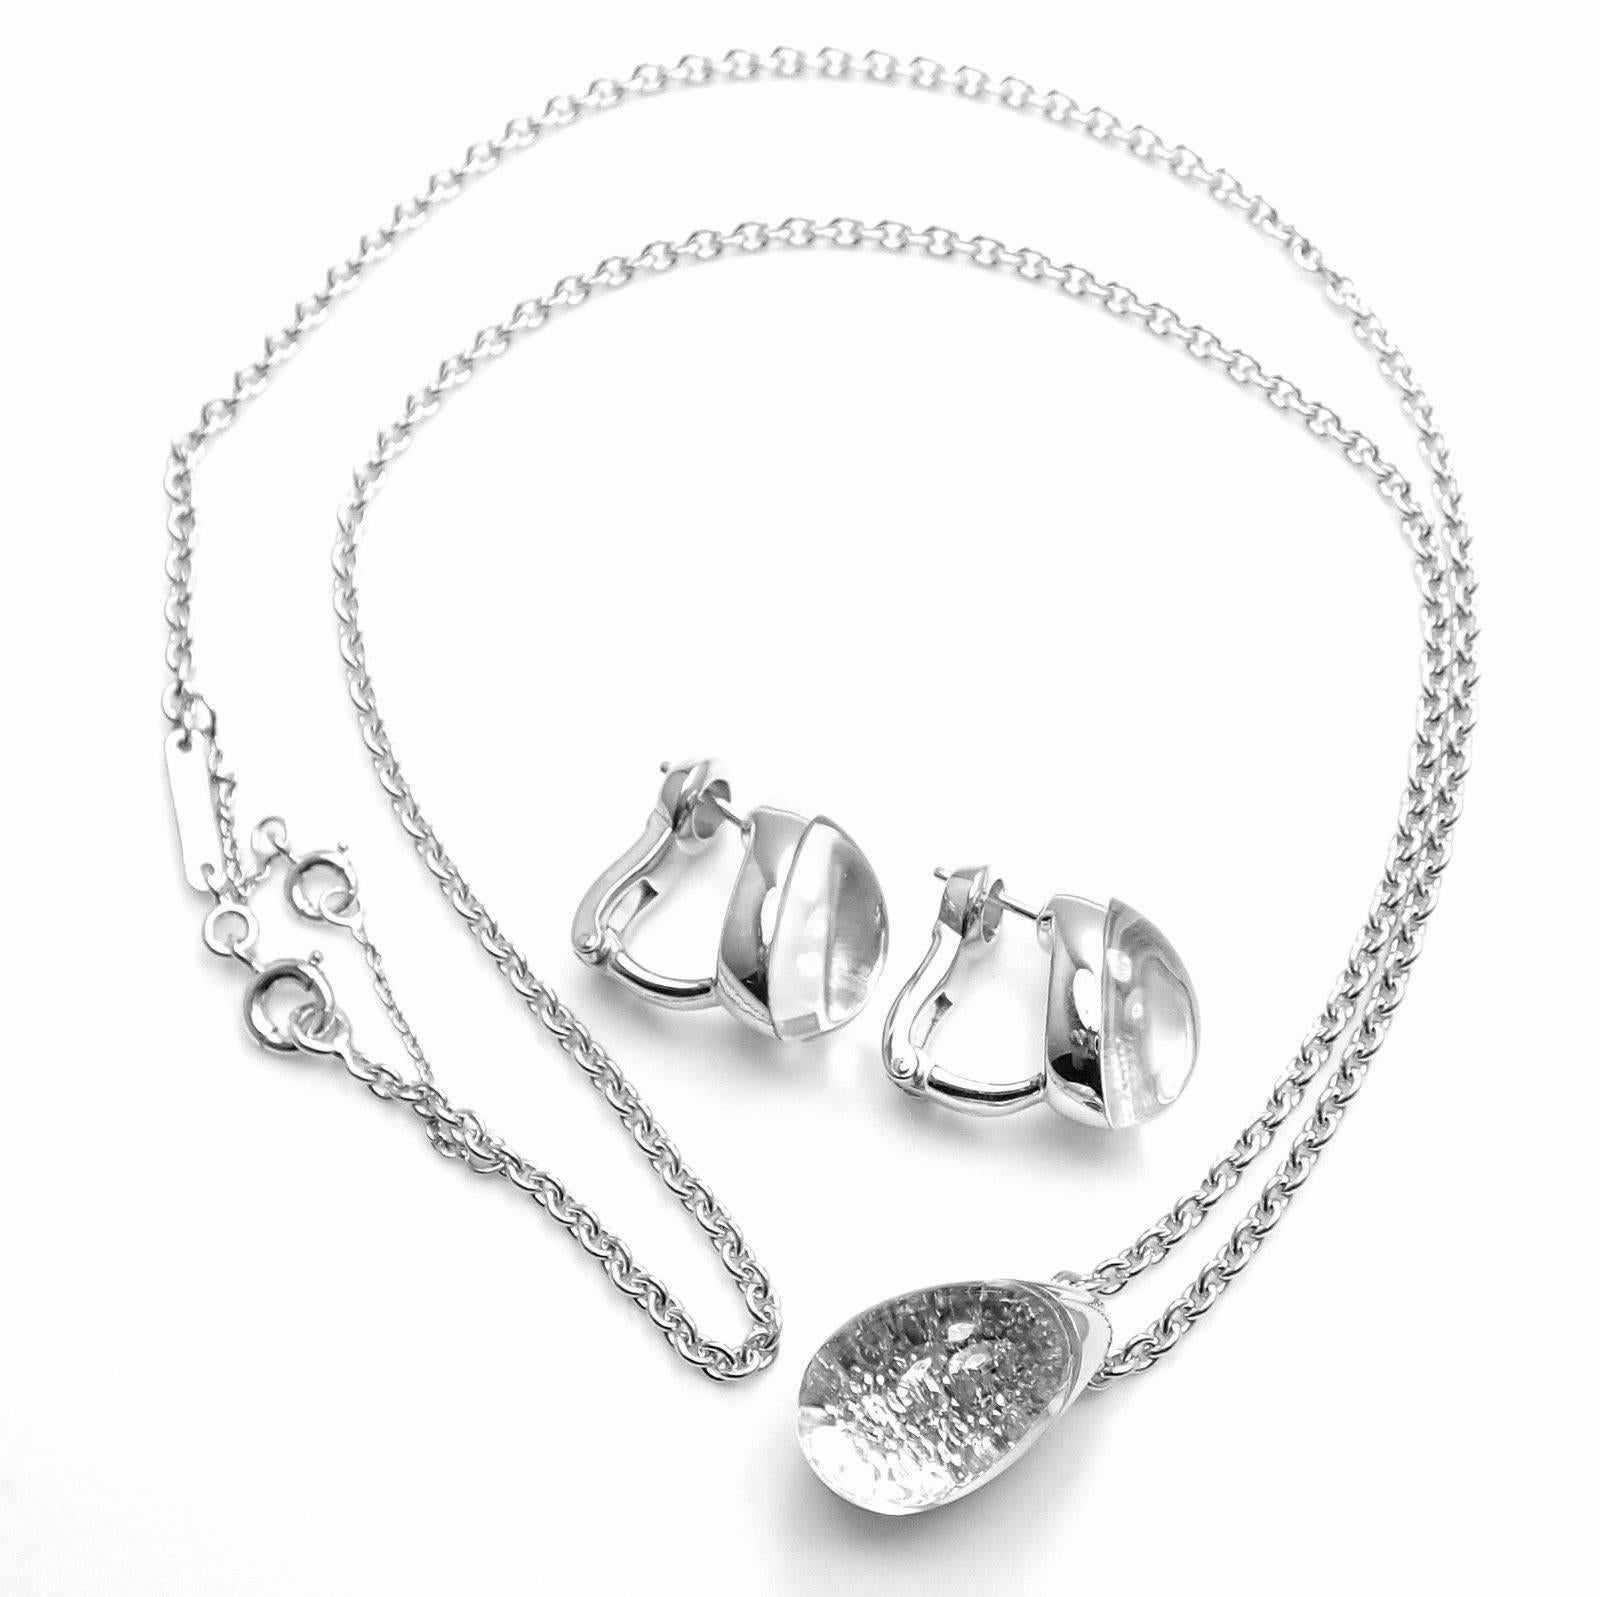 Women's or Men's Myst de Cartier Rock Crystal Diamond White Gold Set of Necklace and Earrings